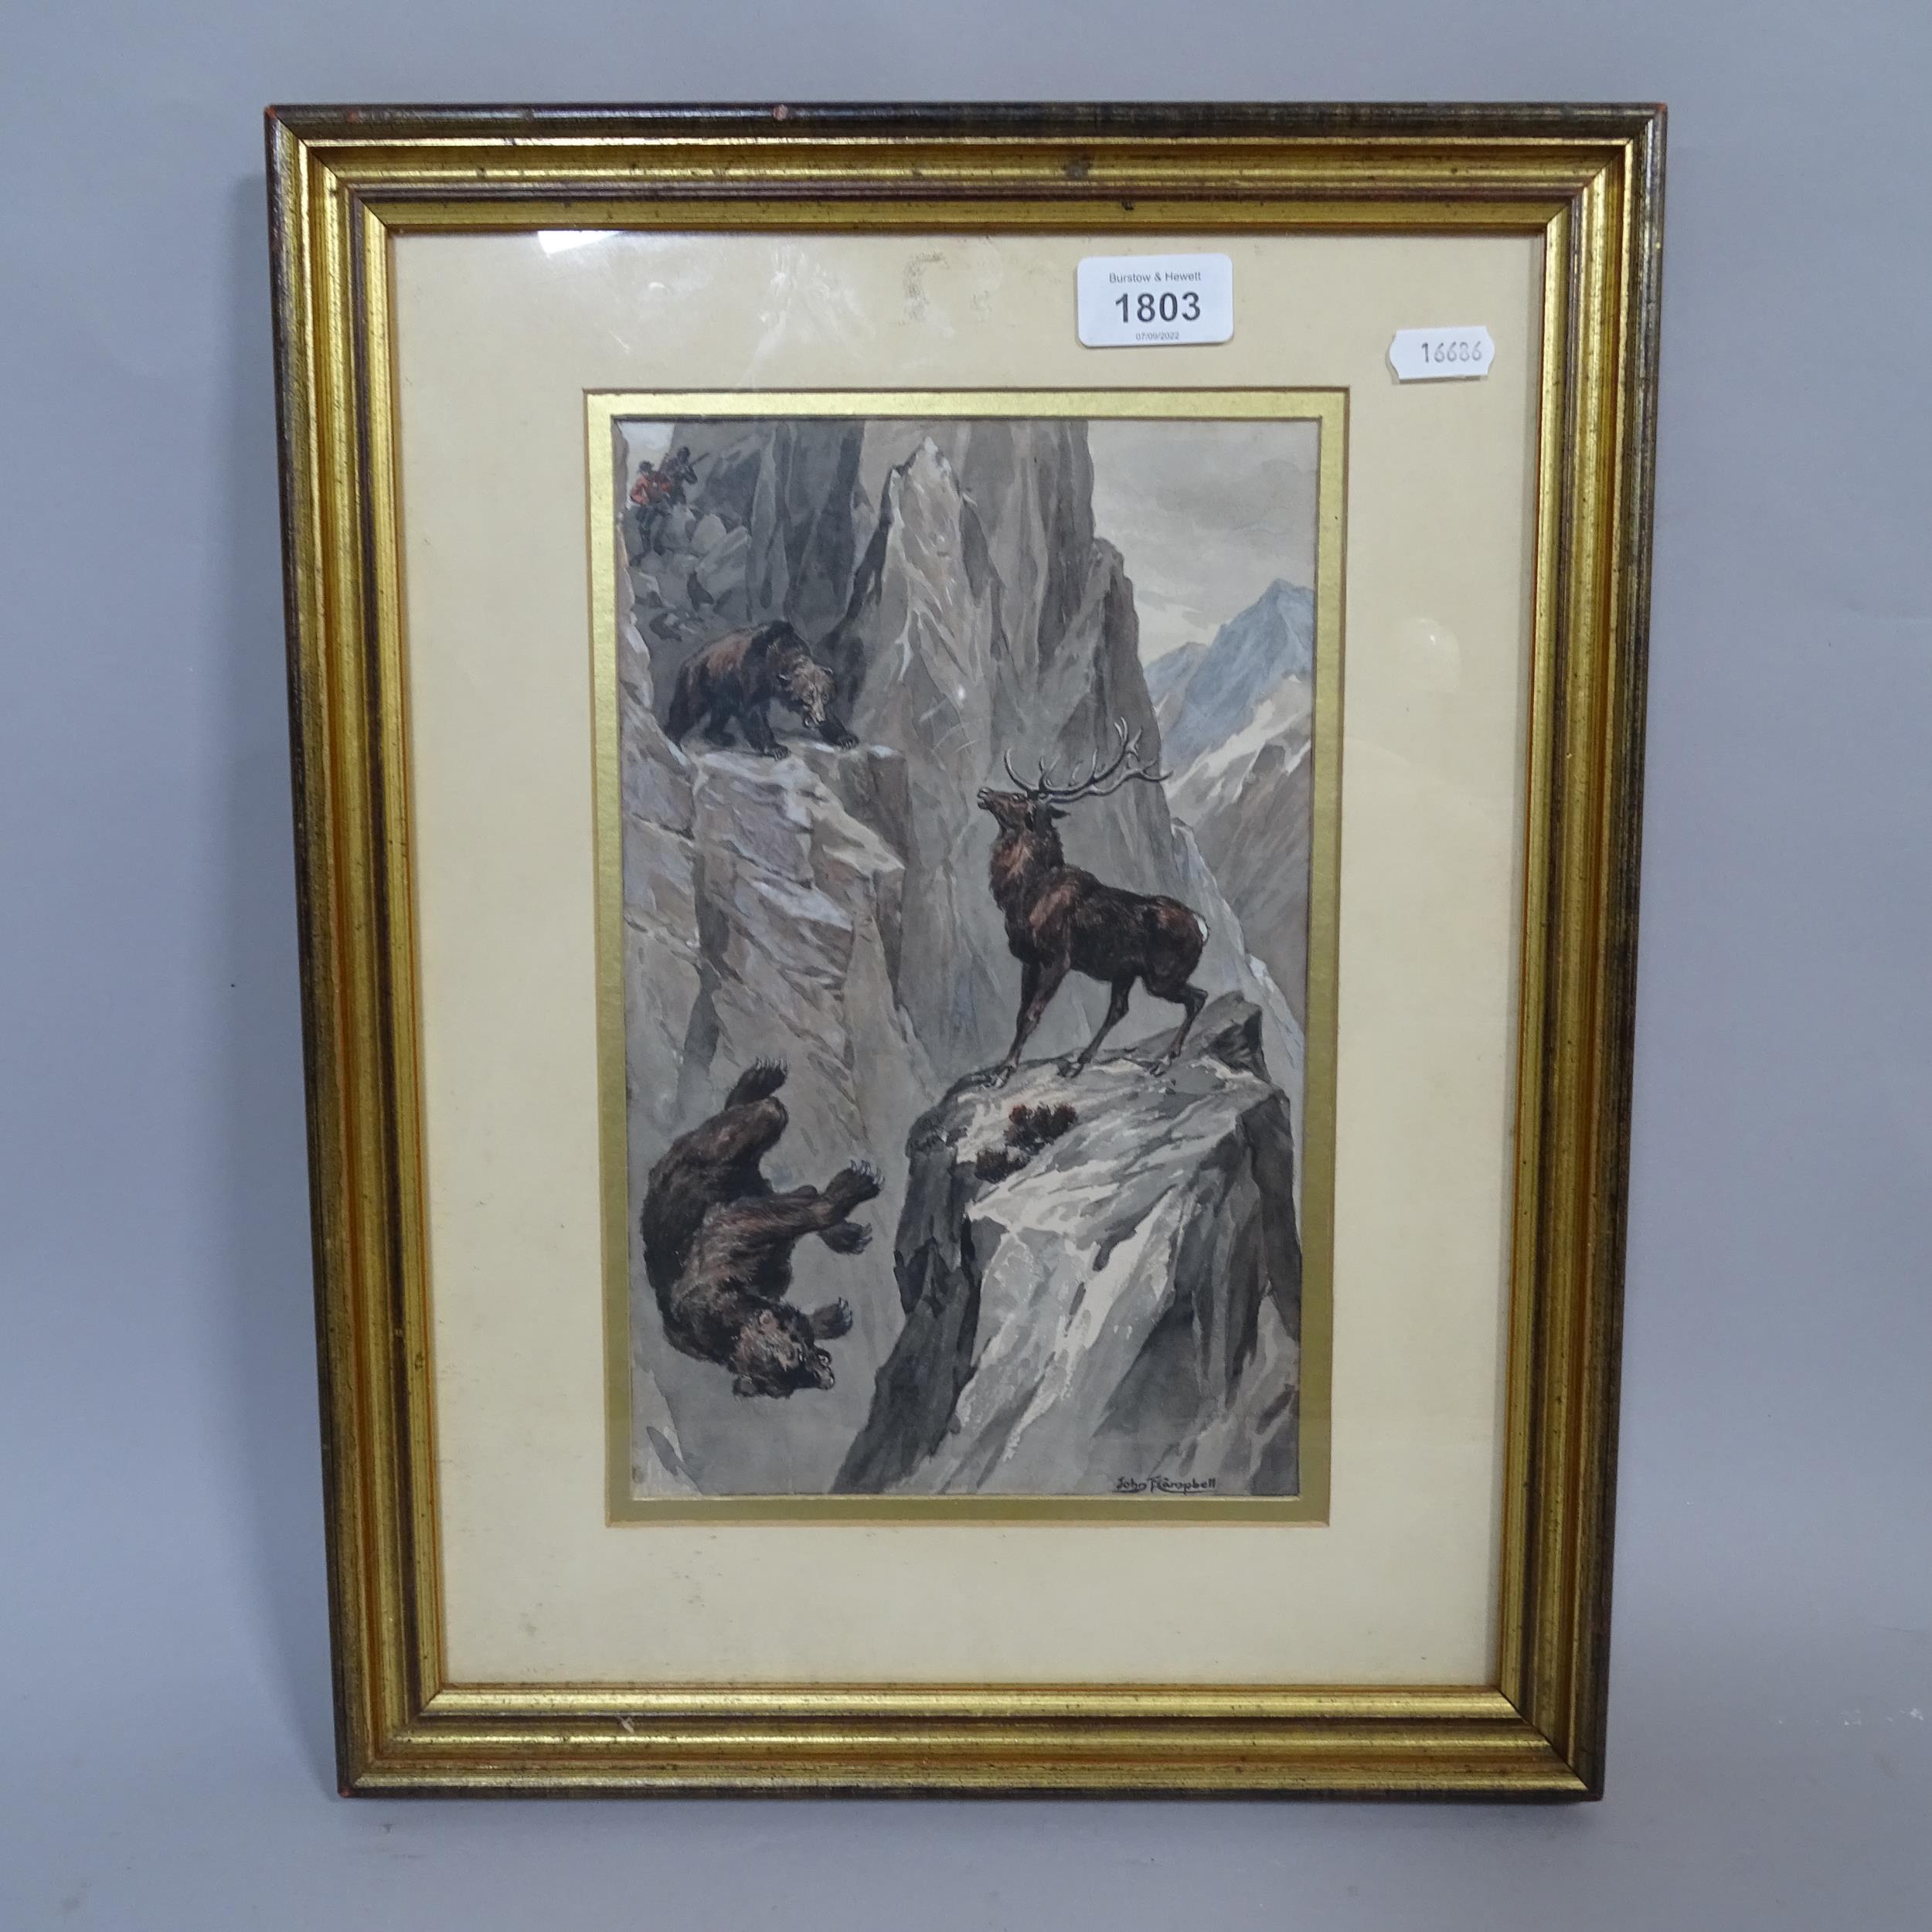 John F Campbell (flourished 1900 - 1935), original watercolour illustration from Adventures Among